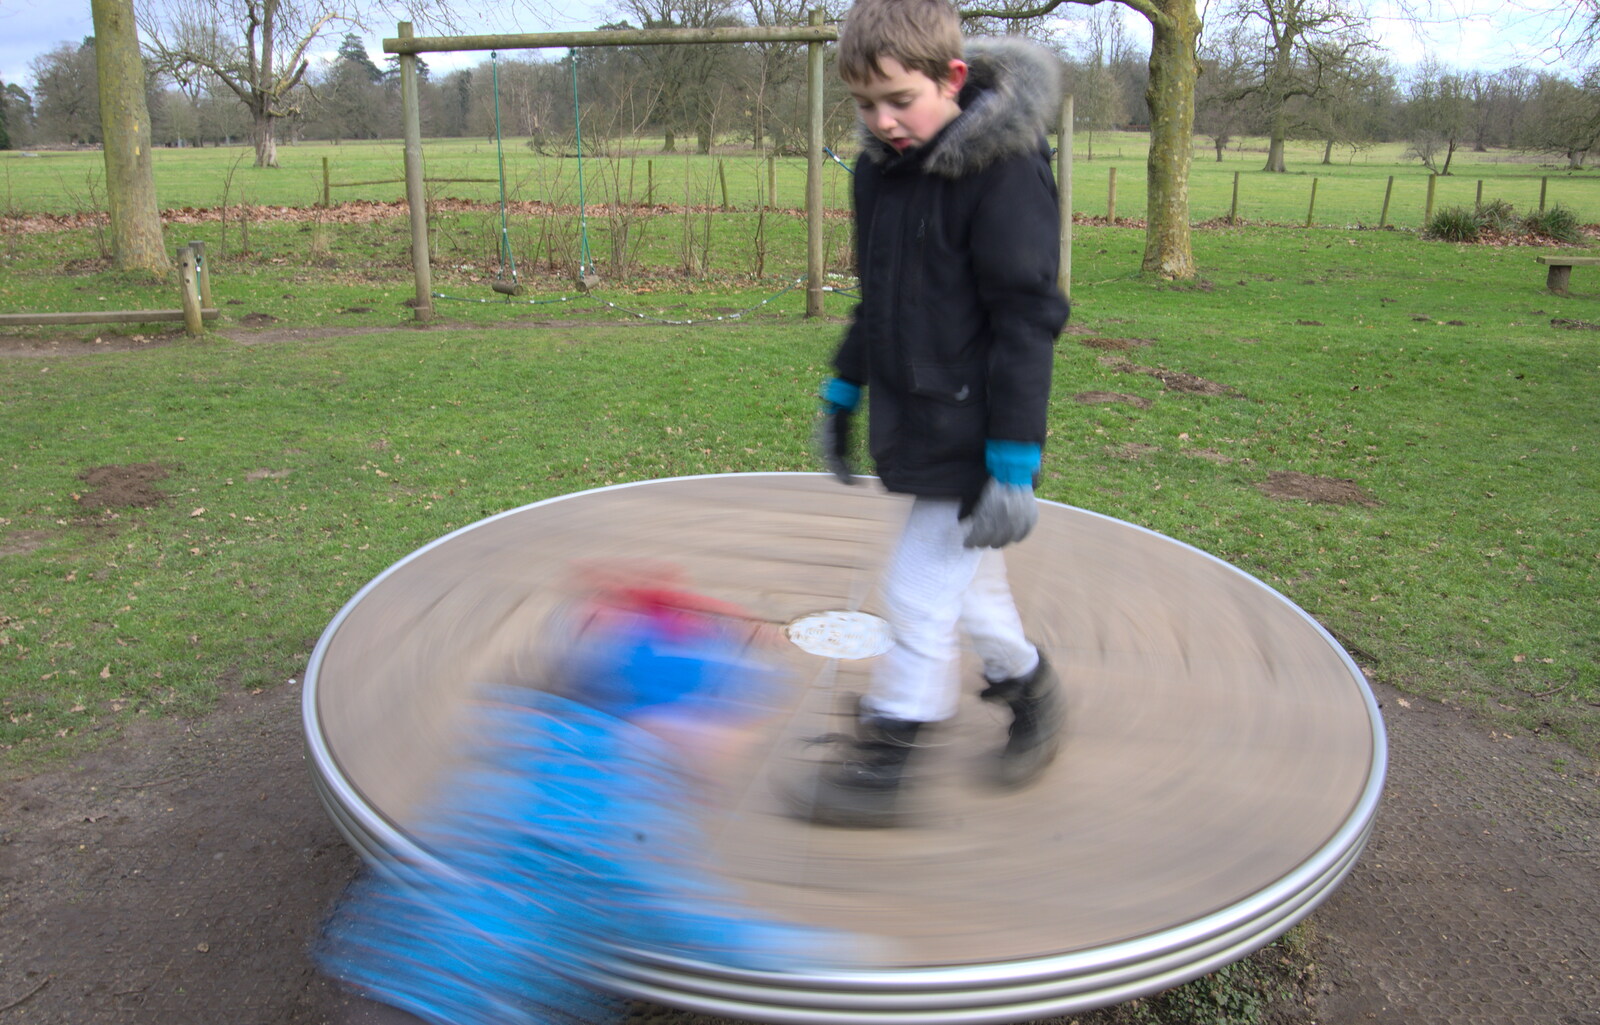 Harry's a blur as he spins the roundabout from A Return to Thornham Walks, Suffolk - 4th February 2018